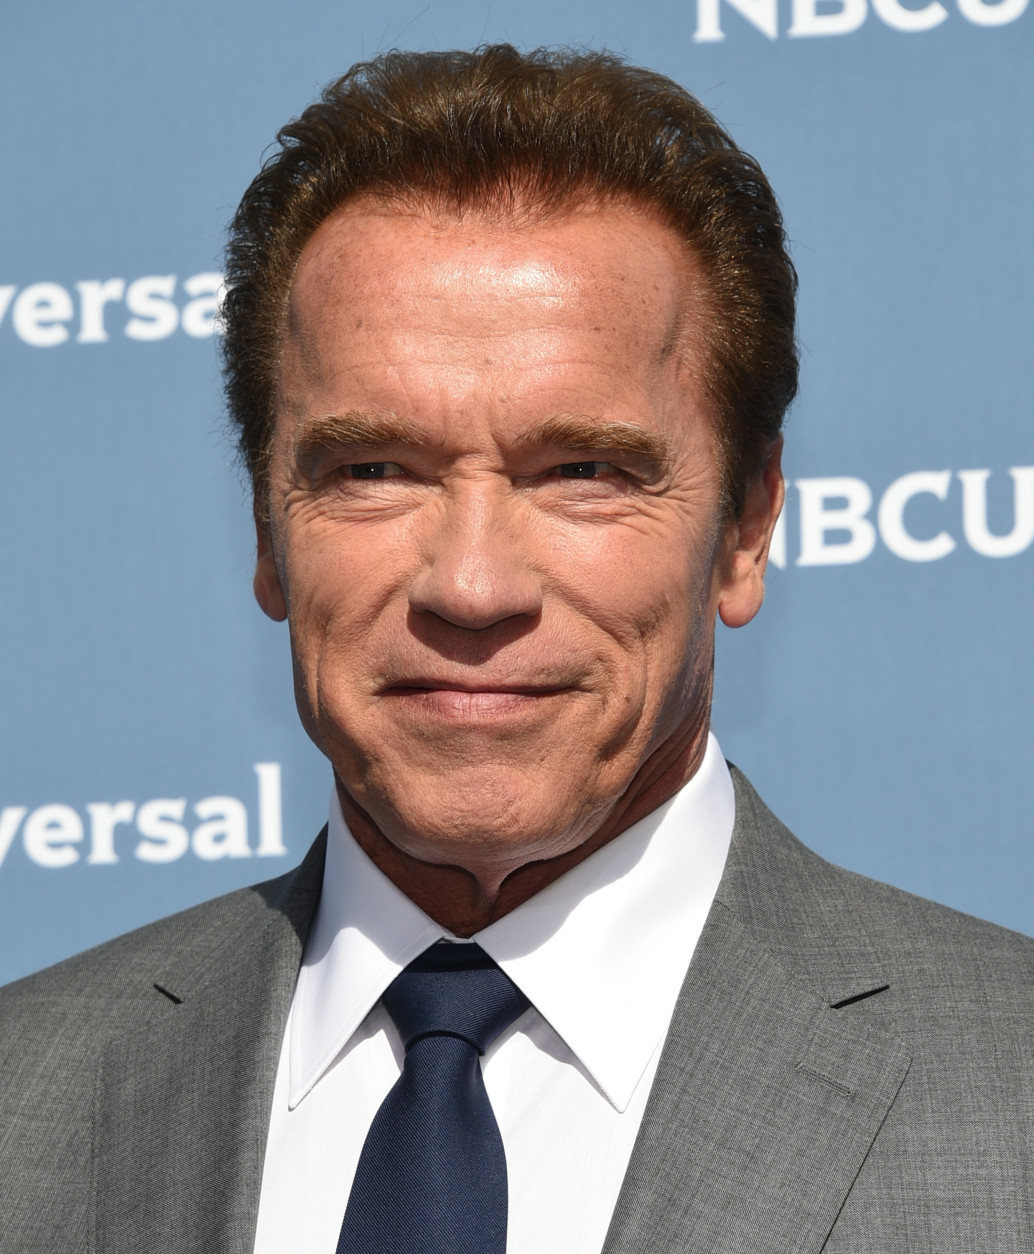 Arnold Schwarzenegger attends the NBCUniversal 2016 Upfront Presentation at Radio City Music Hall on Monday, May 16, 2016, in New York. (Photo by Evan Agostini/Invision/AP)